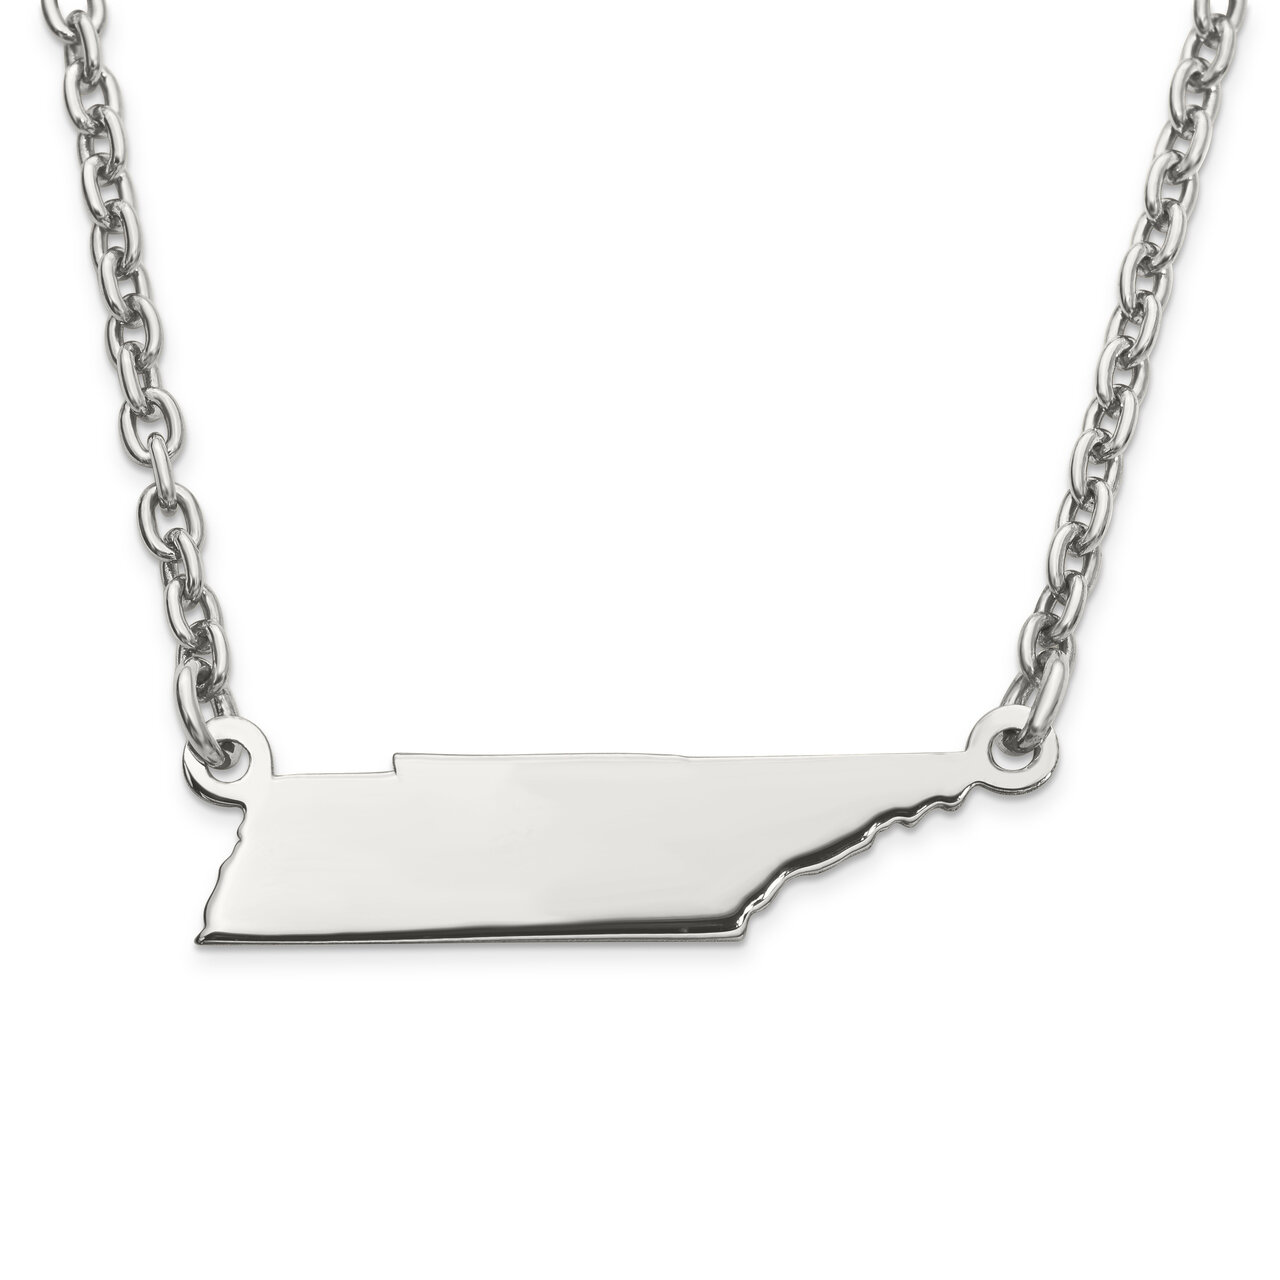 Tennessee State Pendant Necklace with Chain 14k White Gold Engravable XNA706W-TN